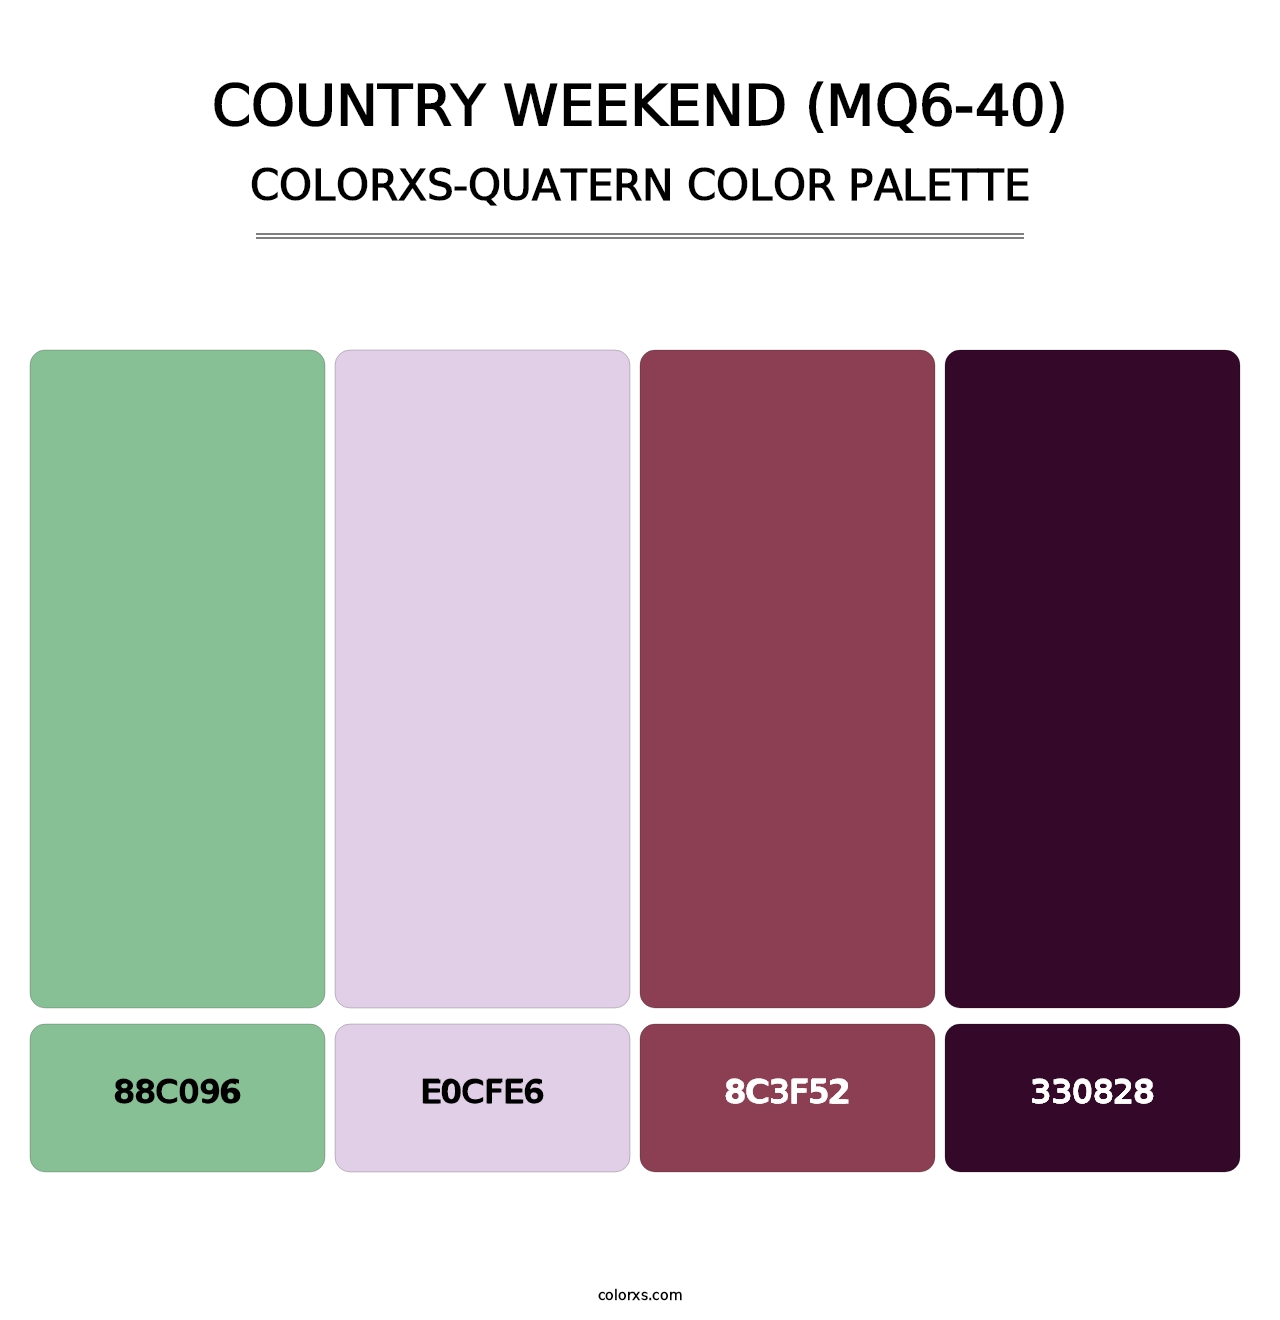 Country Weekend (MQ6-40) - Colorxs Quatern Palette